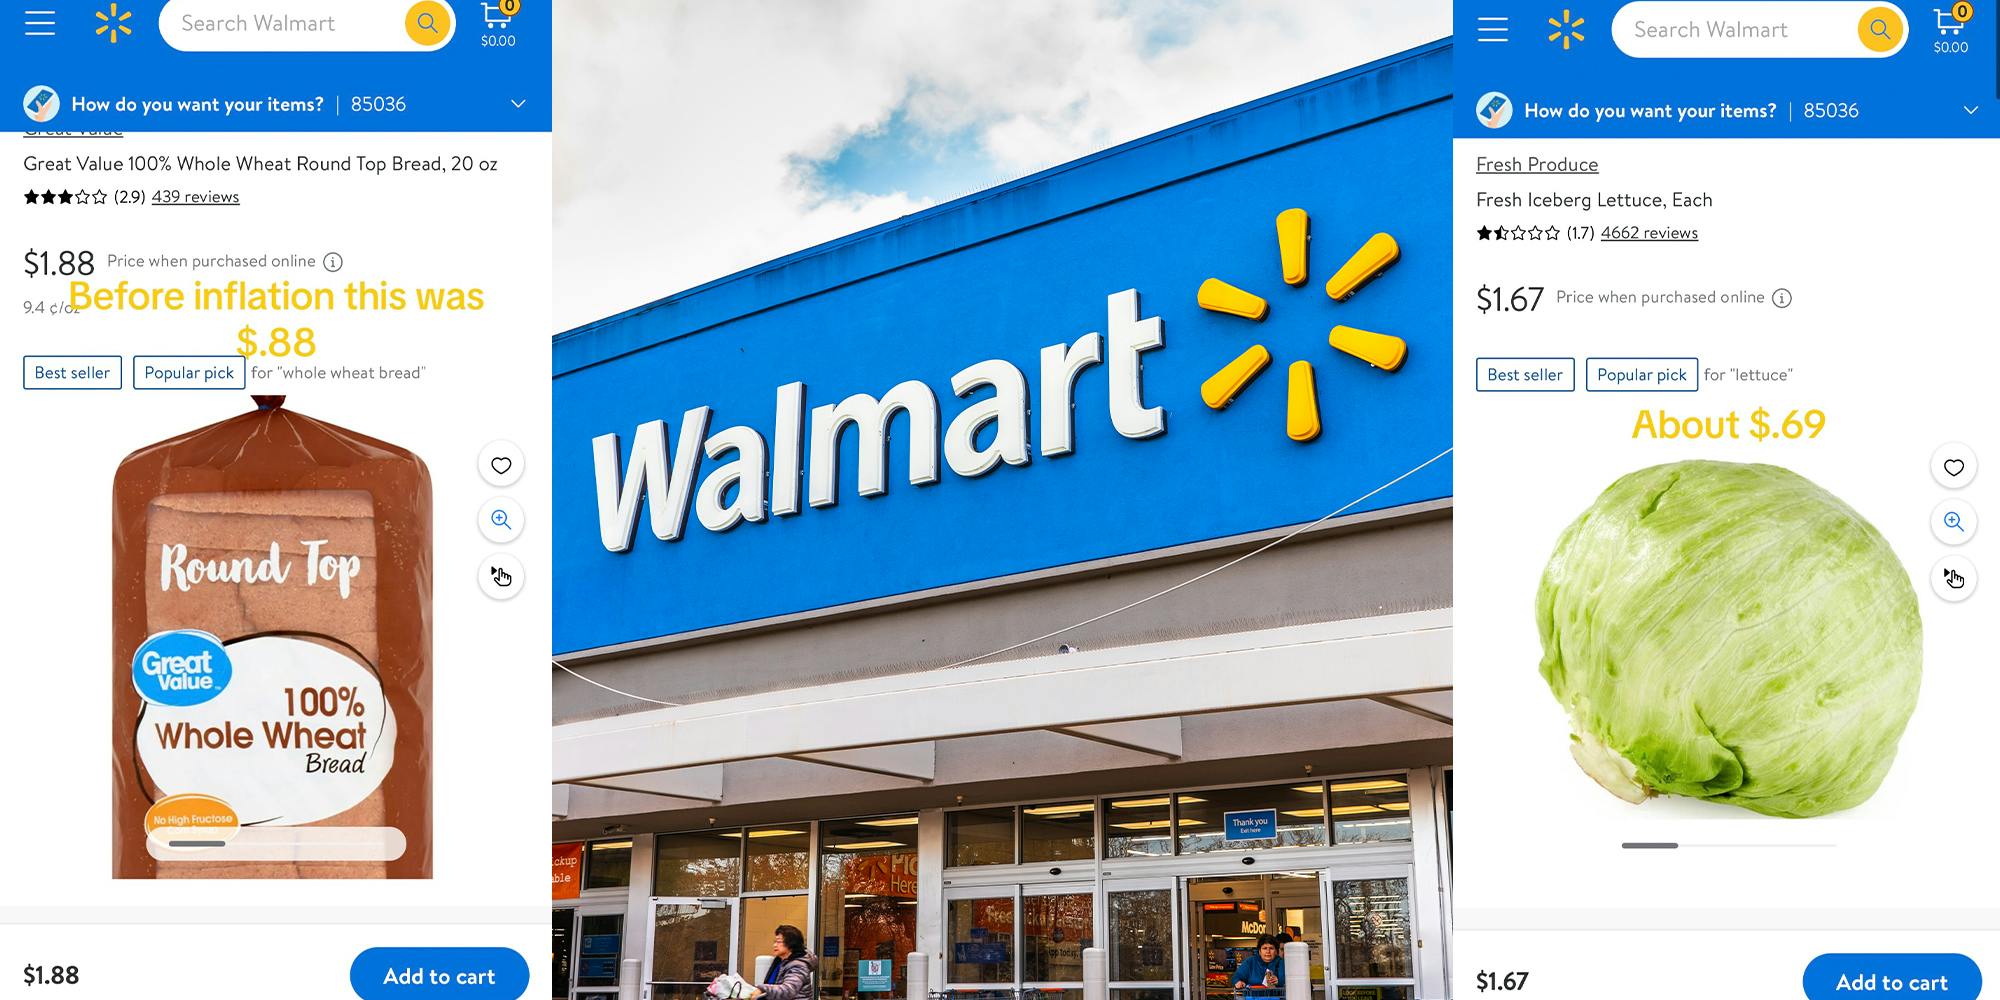 walmart customer shares items that increased in price, exposes brands